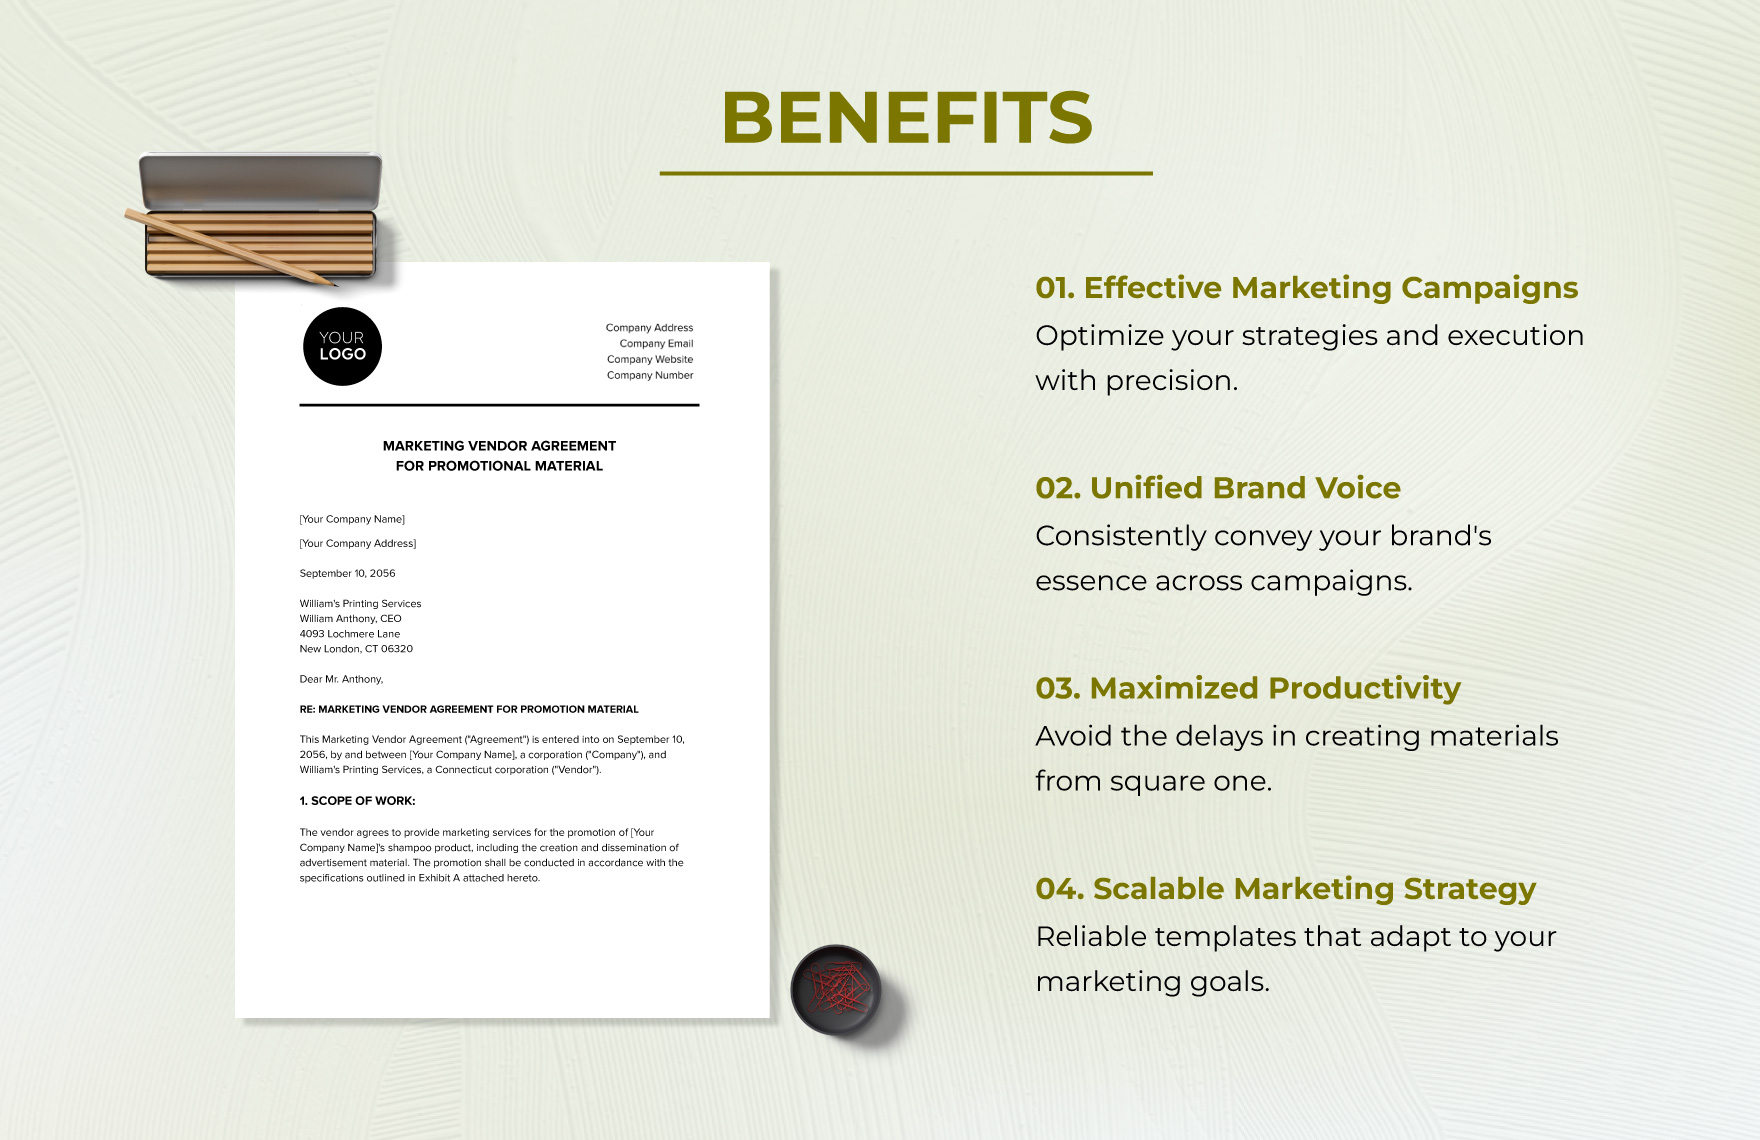 Marketing Vendor Agreement for Promotion Material Template